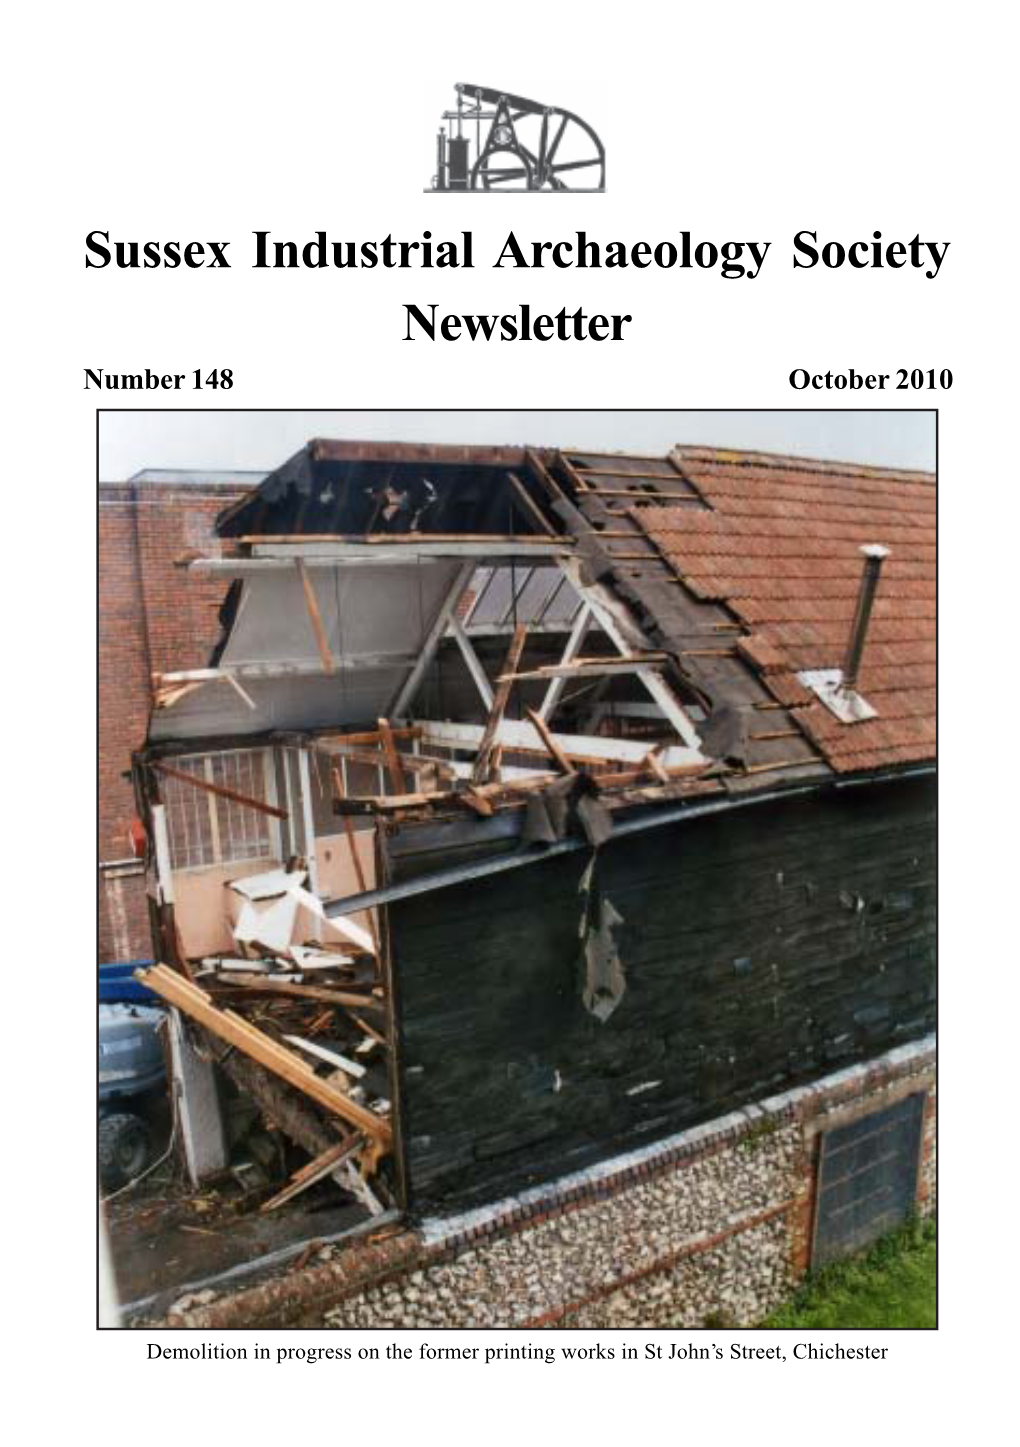 Sussex Industrial Archaeology Society Newsletter Number 148 October 2010